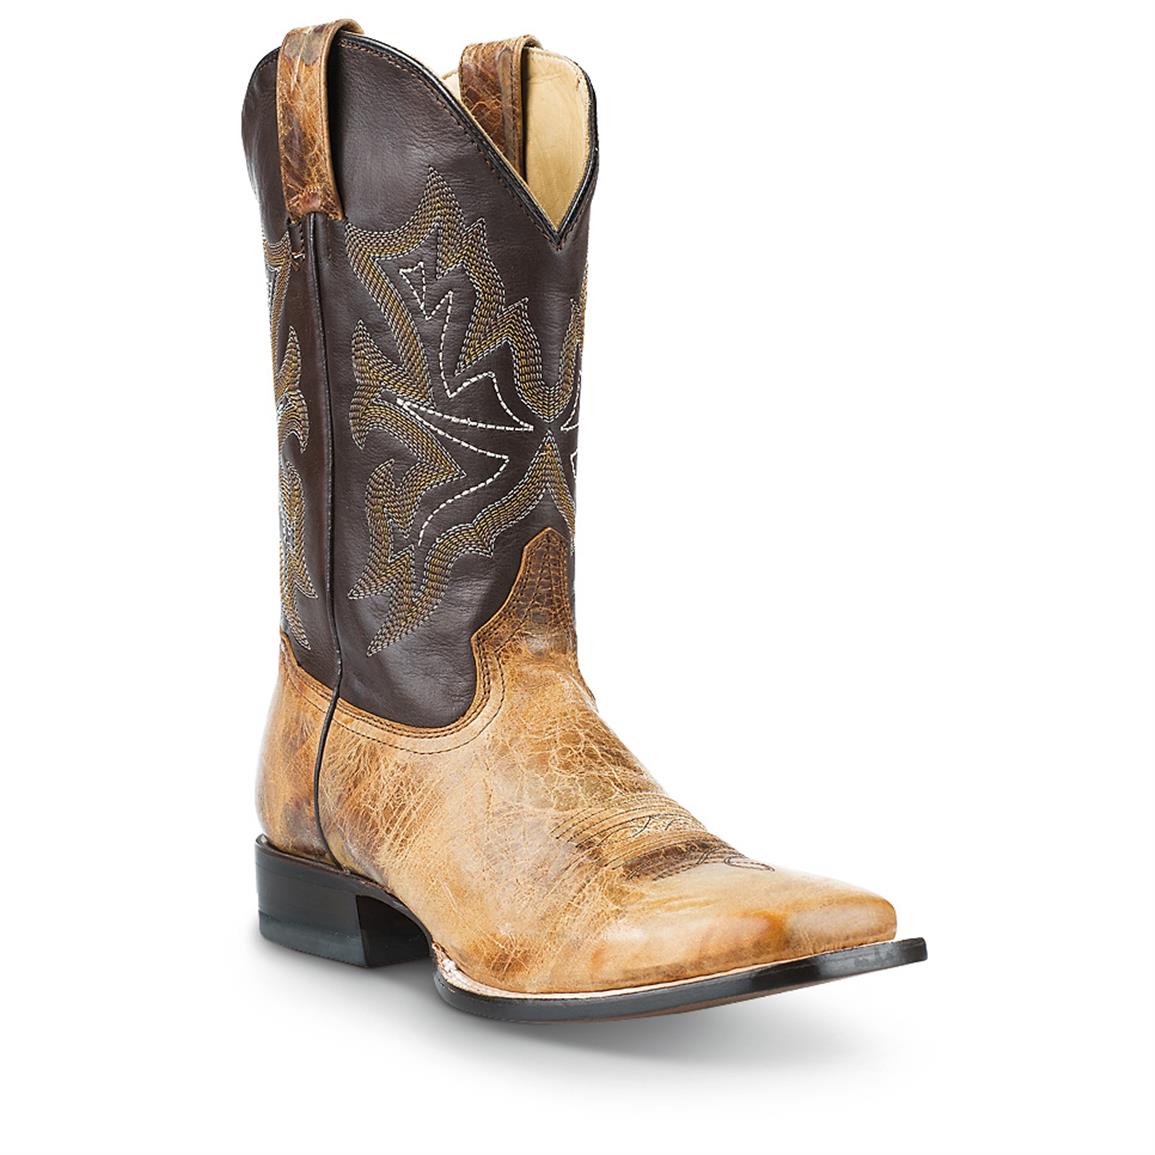 Wide Square Toe Cowboy Boots 